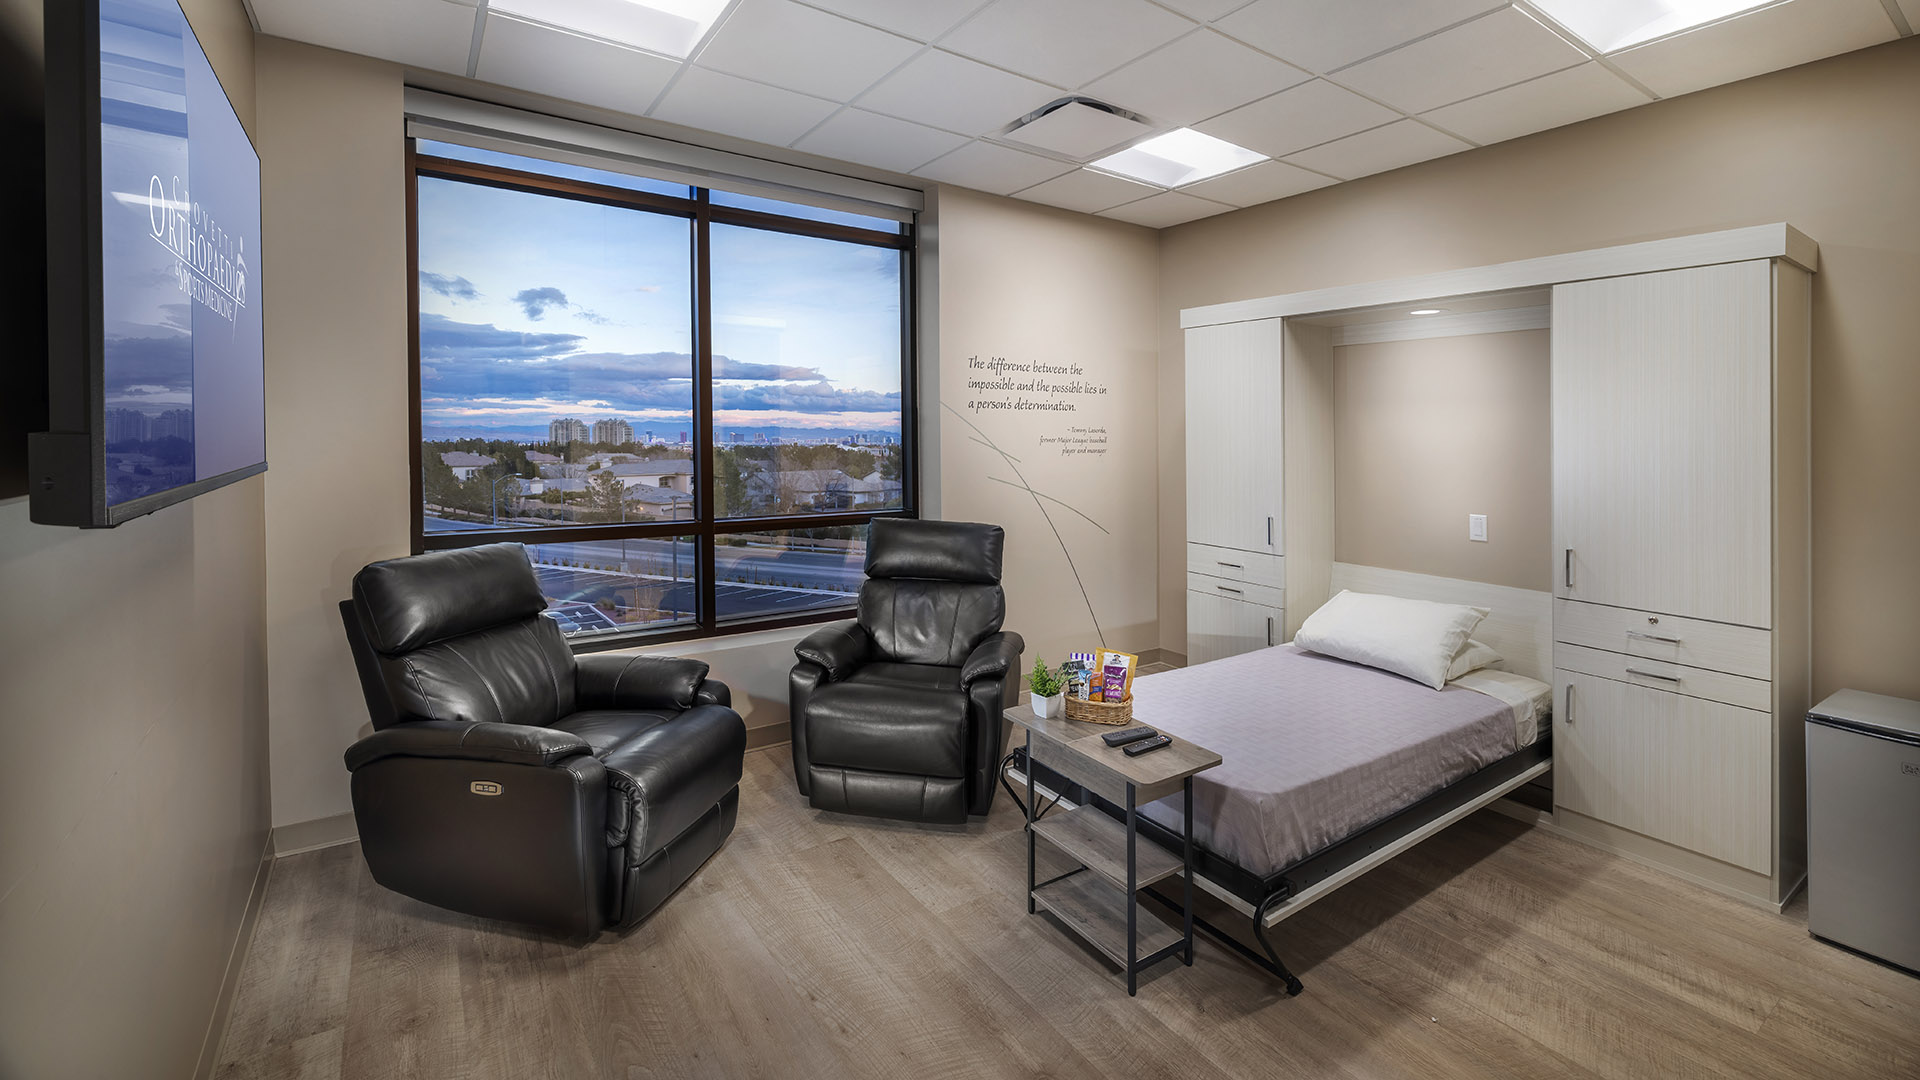 Private recovery suite with bed, chairs, and TV at Crovetti Orthopaedics